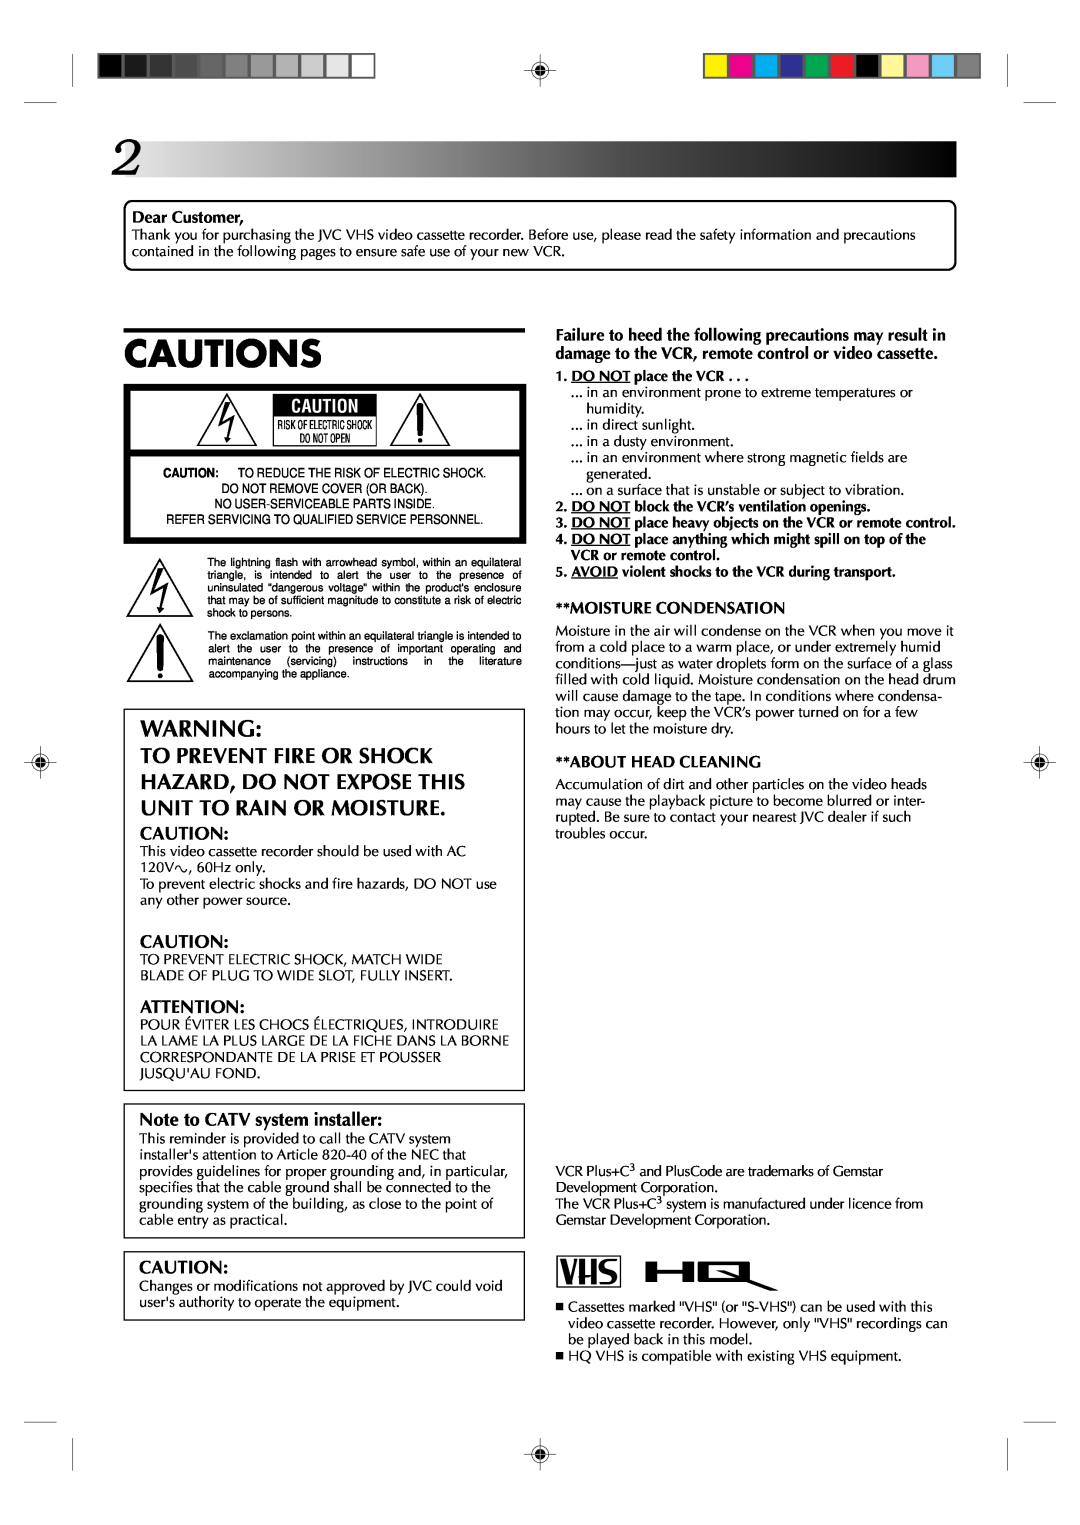 JVC HR-VP434U manual Cautions, DO NOT place the VCR, DO NOT block the VCR’s ventilation openings 